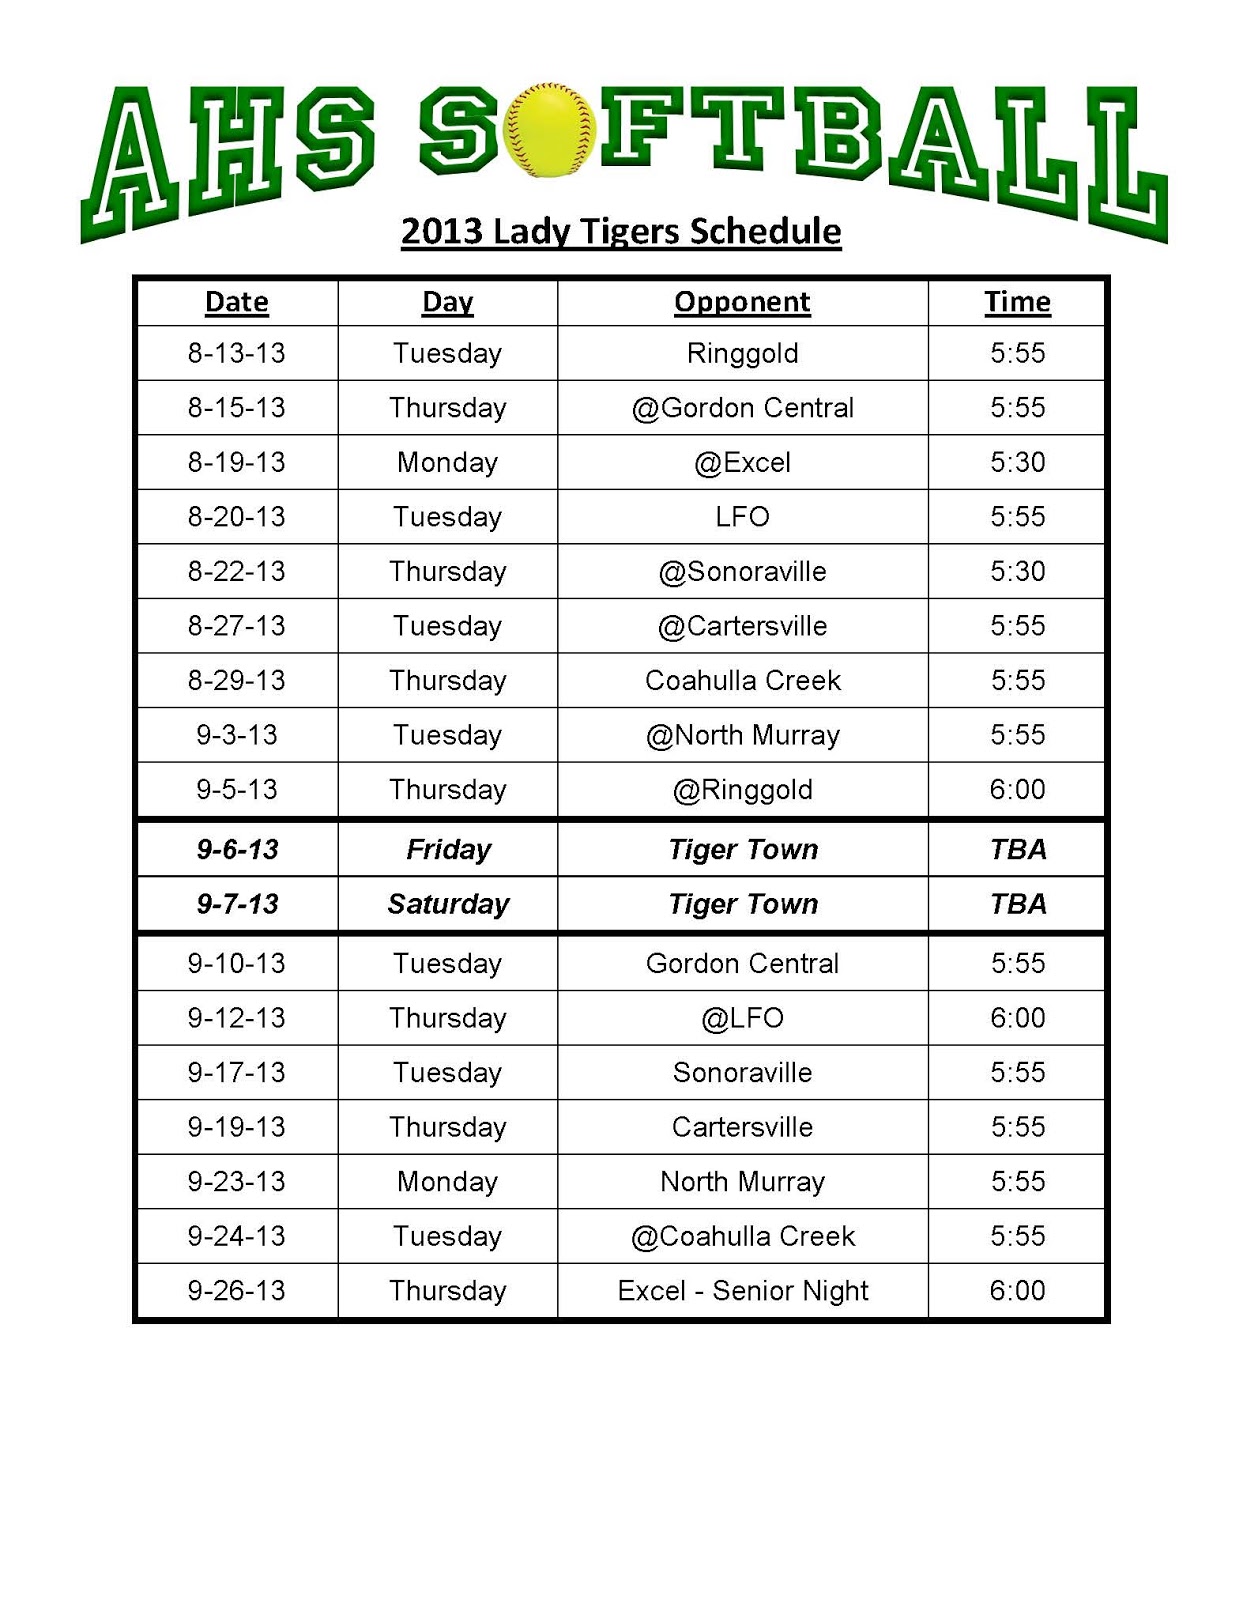 ahs-softball-lady-tigers-game-schedule-for-2013